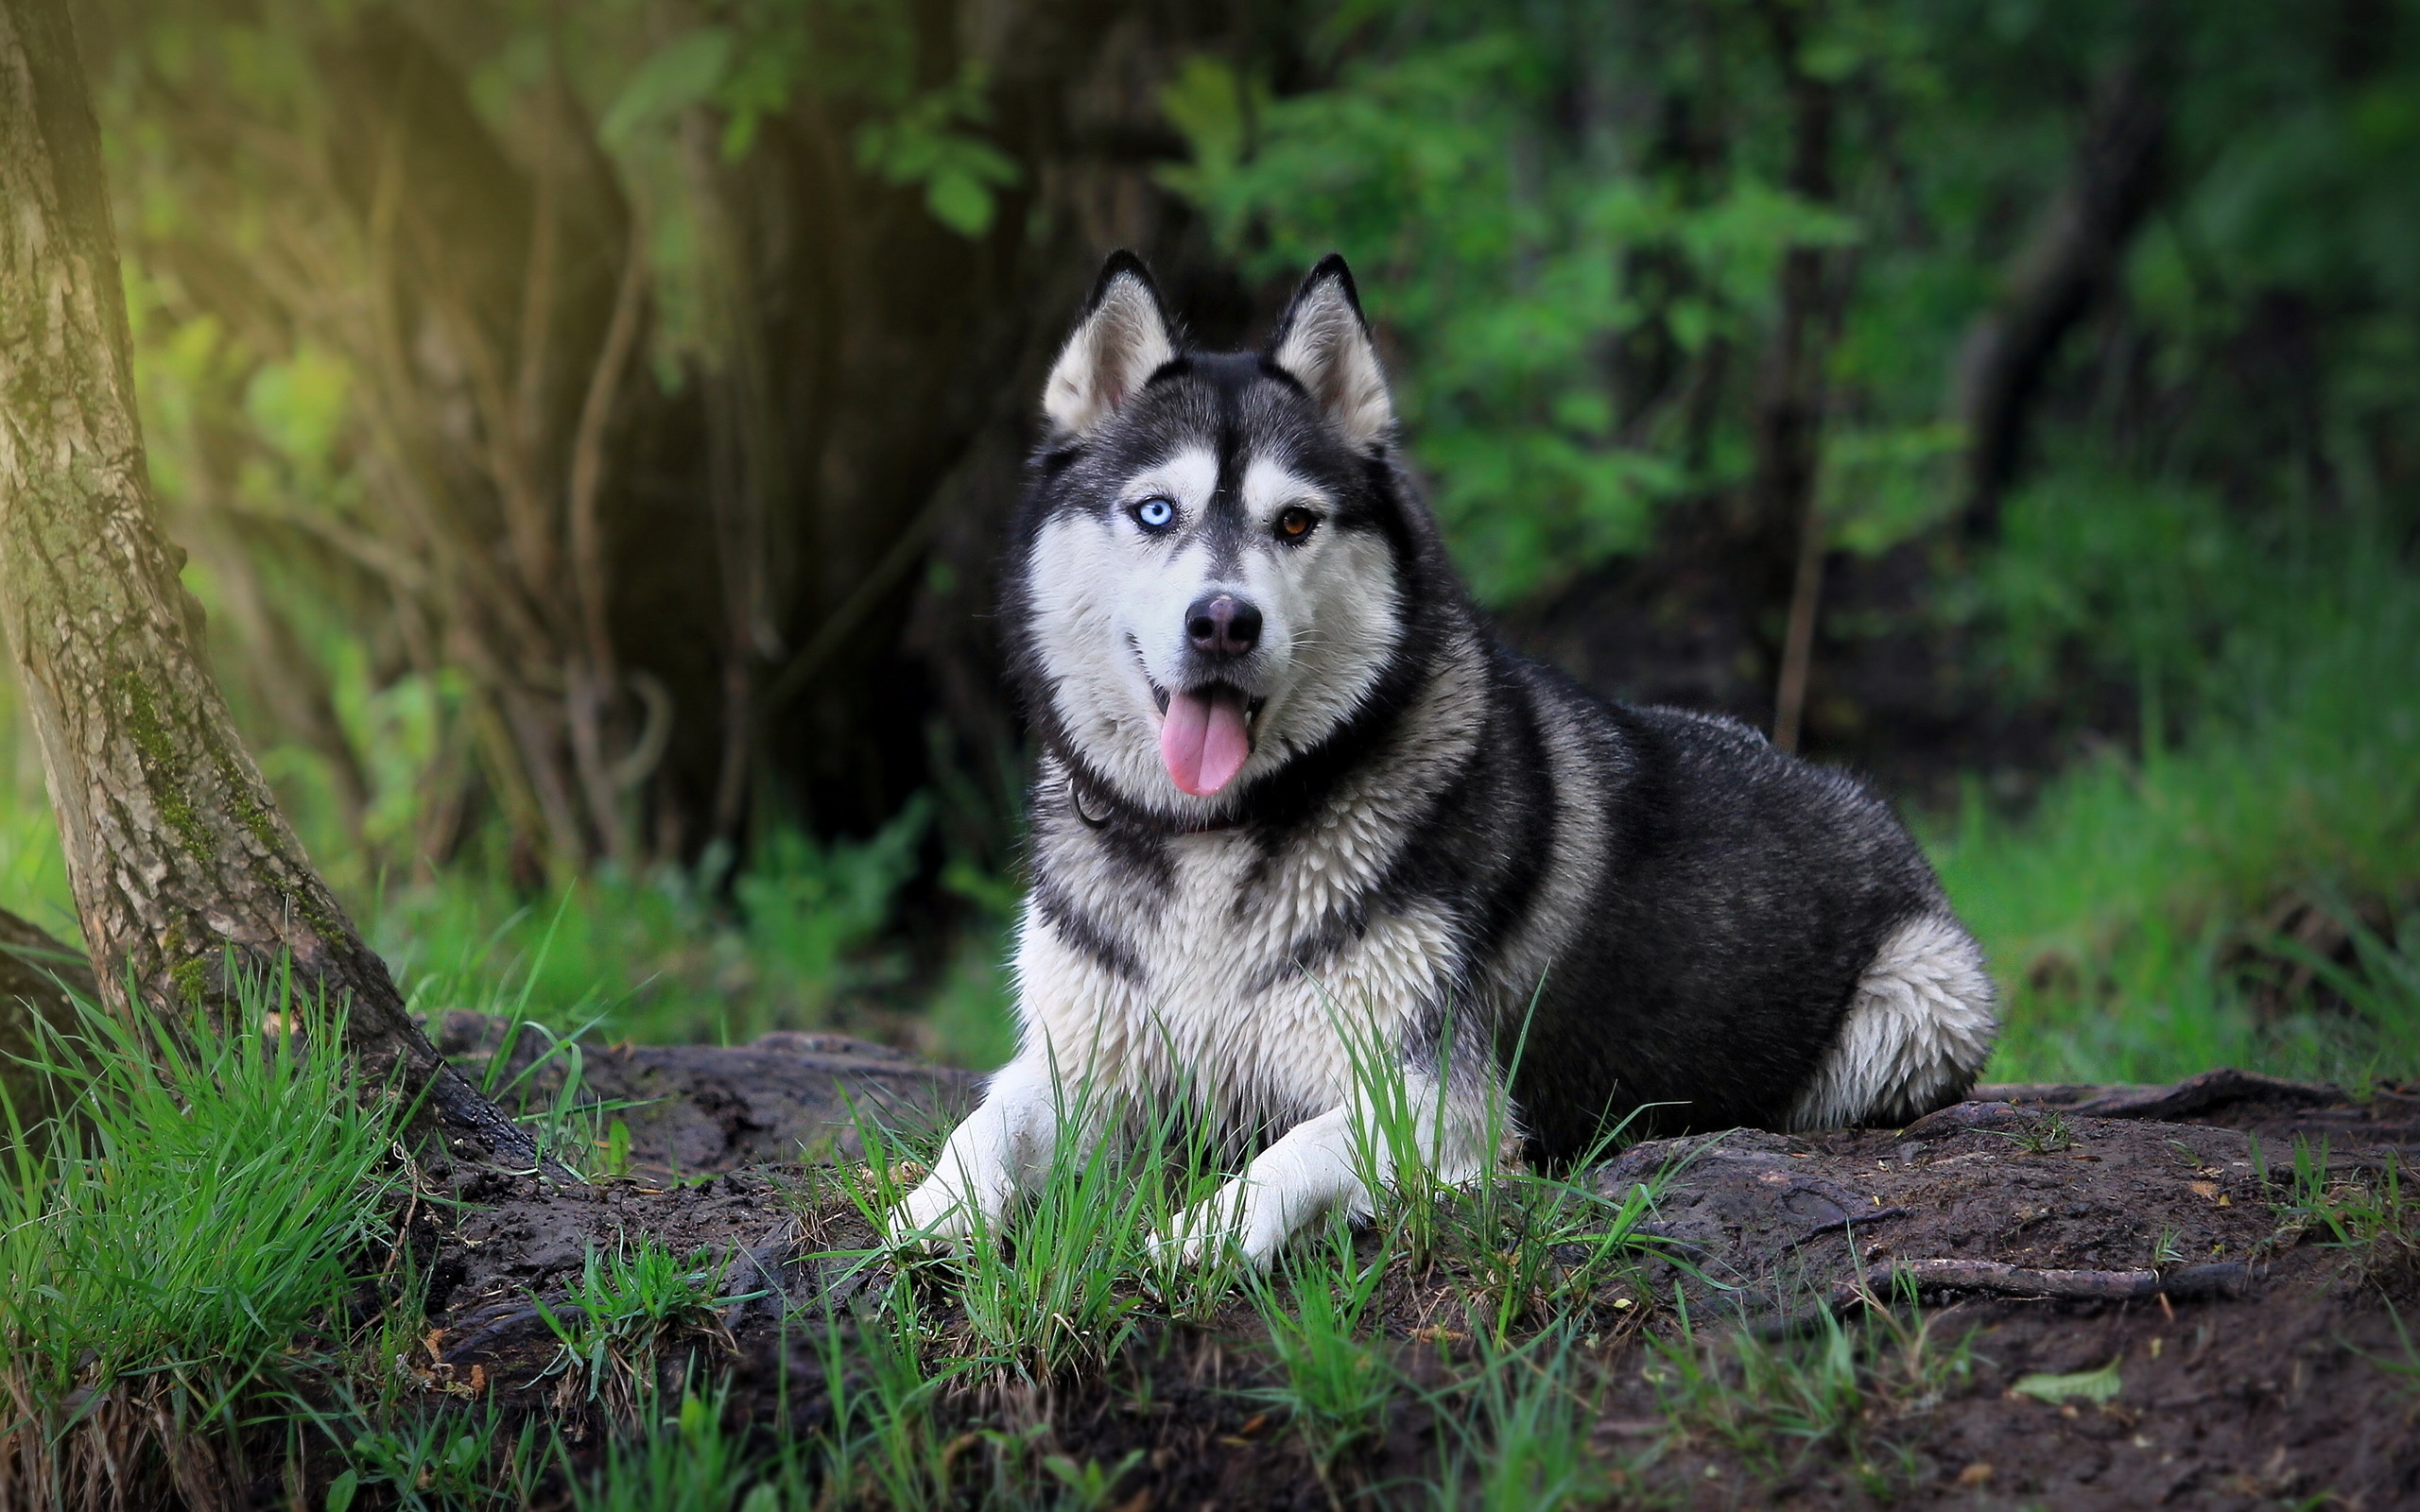 Cute husky wallpapers, Michelle Thompson's collection, Playful expressions, Irresistible charm, 2560x1600 HD Desktop